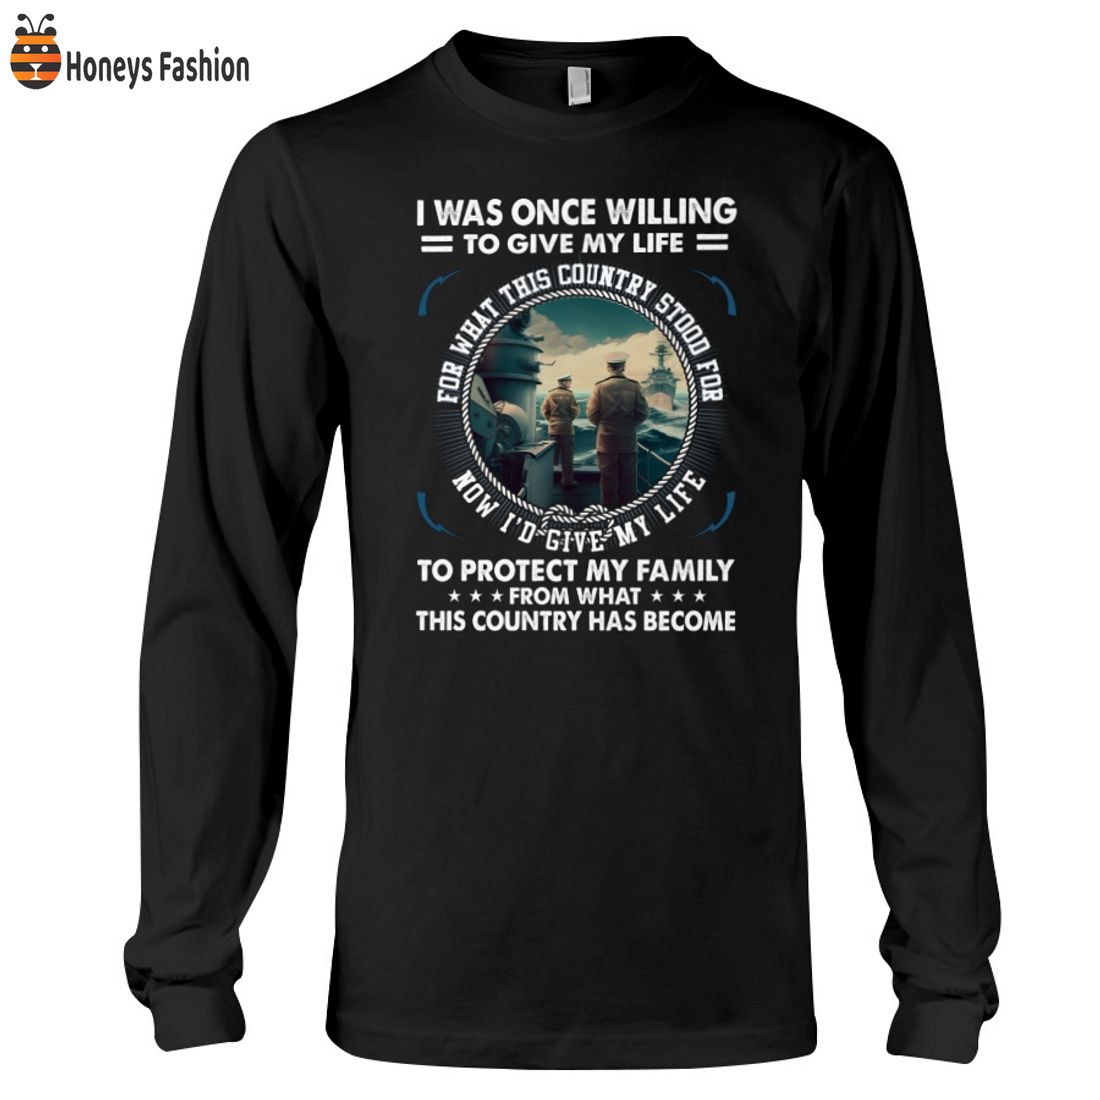 BEST SELLER I Was Once Willing To Give My Life 2D Hoodie Tshirt